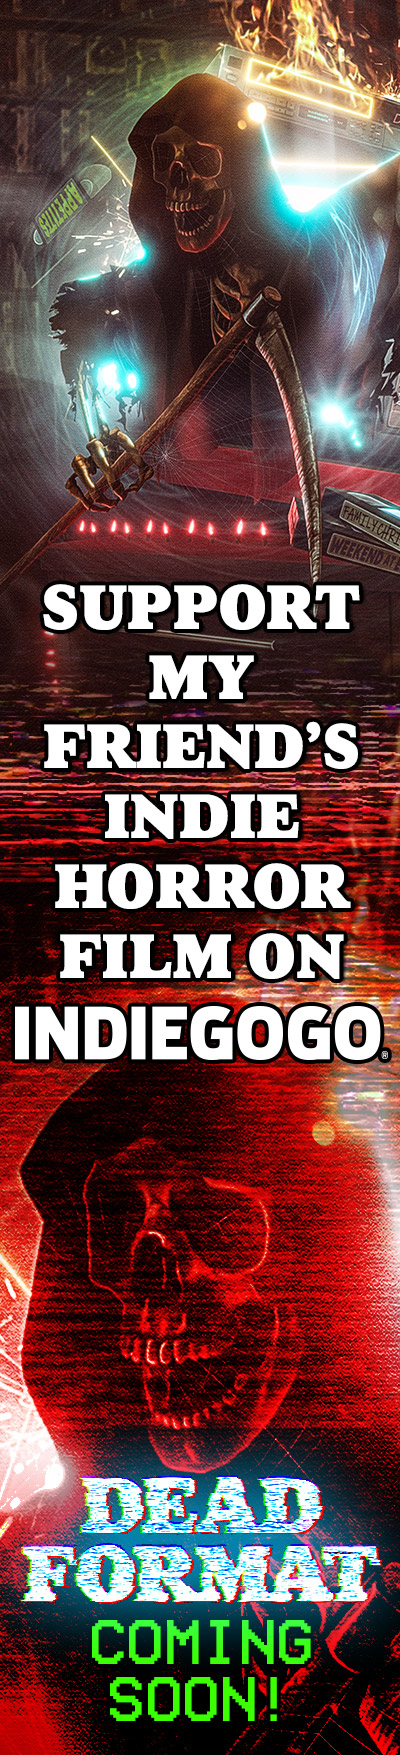 Banner ad for Reel Splatter's new independent horror movie Dead Format, being crowdfunded on Indiegogo